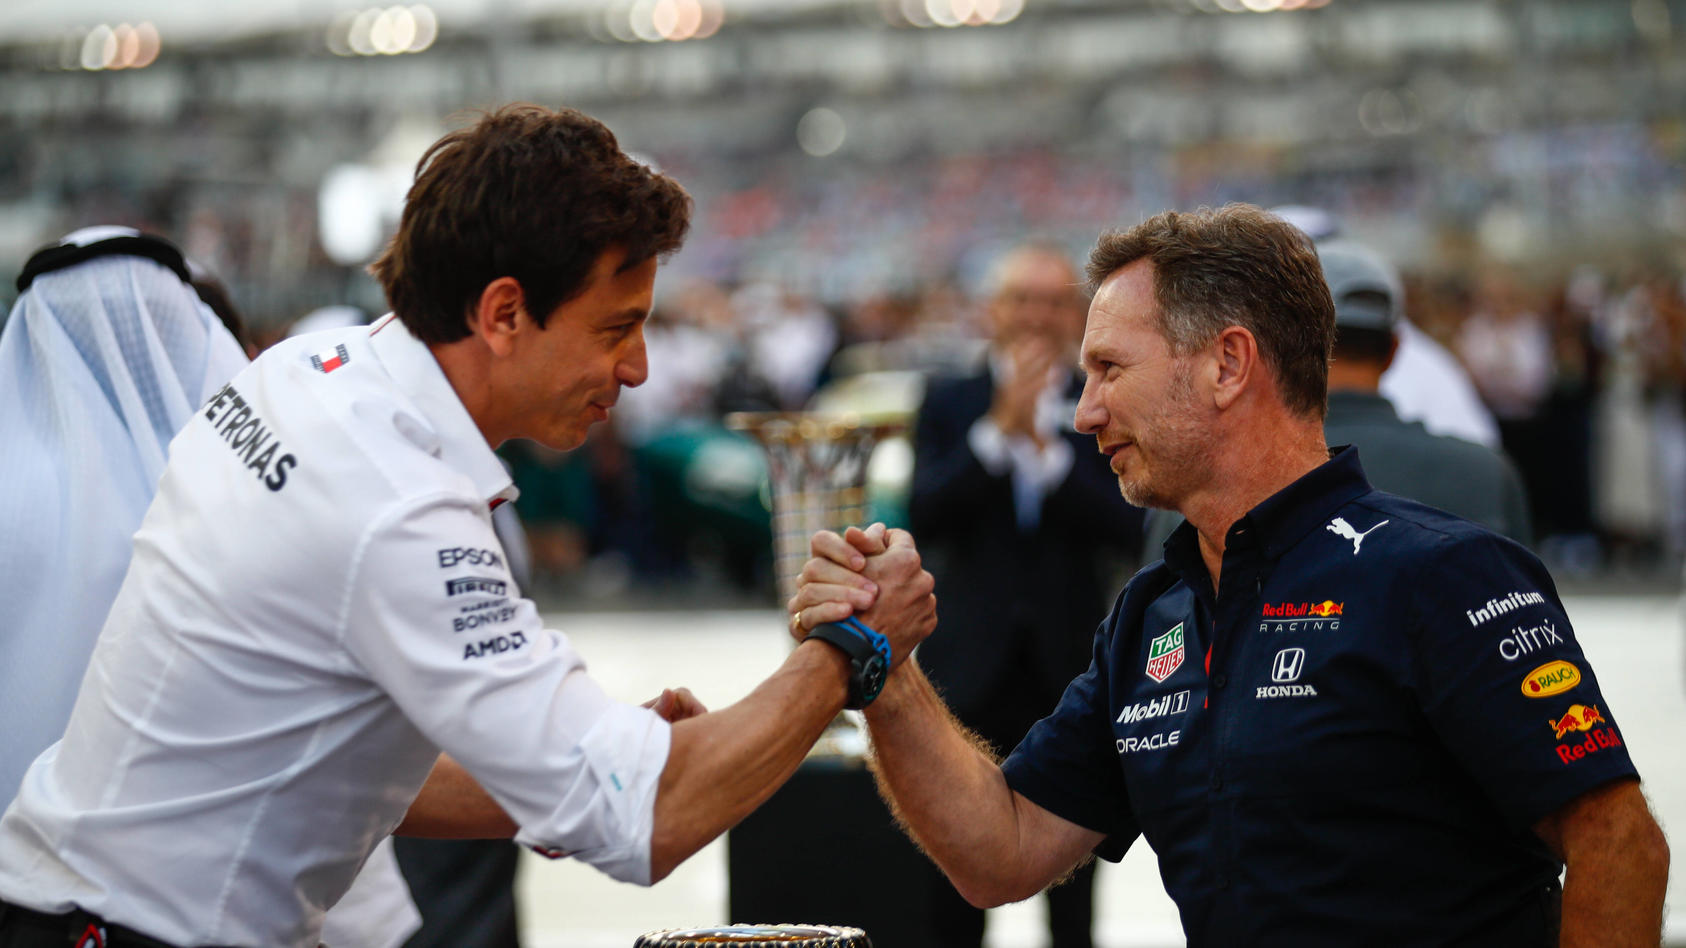  Formula 1 2021: Abu Dhabi GP YAS MARINA CIRCUIT, UNITED ARAB EMIRATES - DECEMBER 12: Toto Wolff, Team Principal and CEO, Mercedes AMG, and Christian Horner, Team Principal, Red Bull Racing, arm wrestle over the trophy on the grid during the Abu Dhab